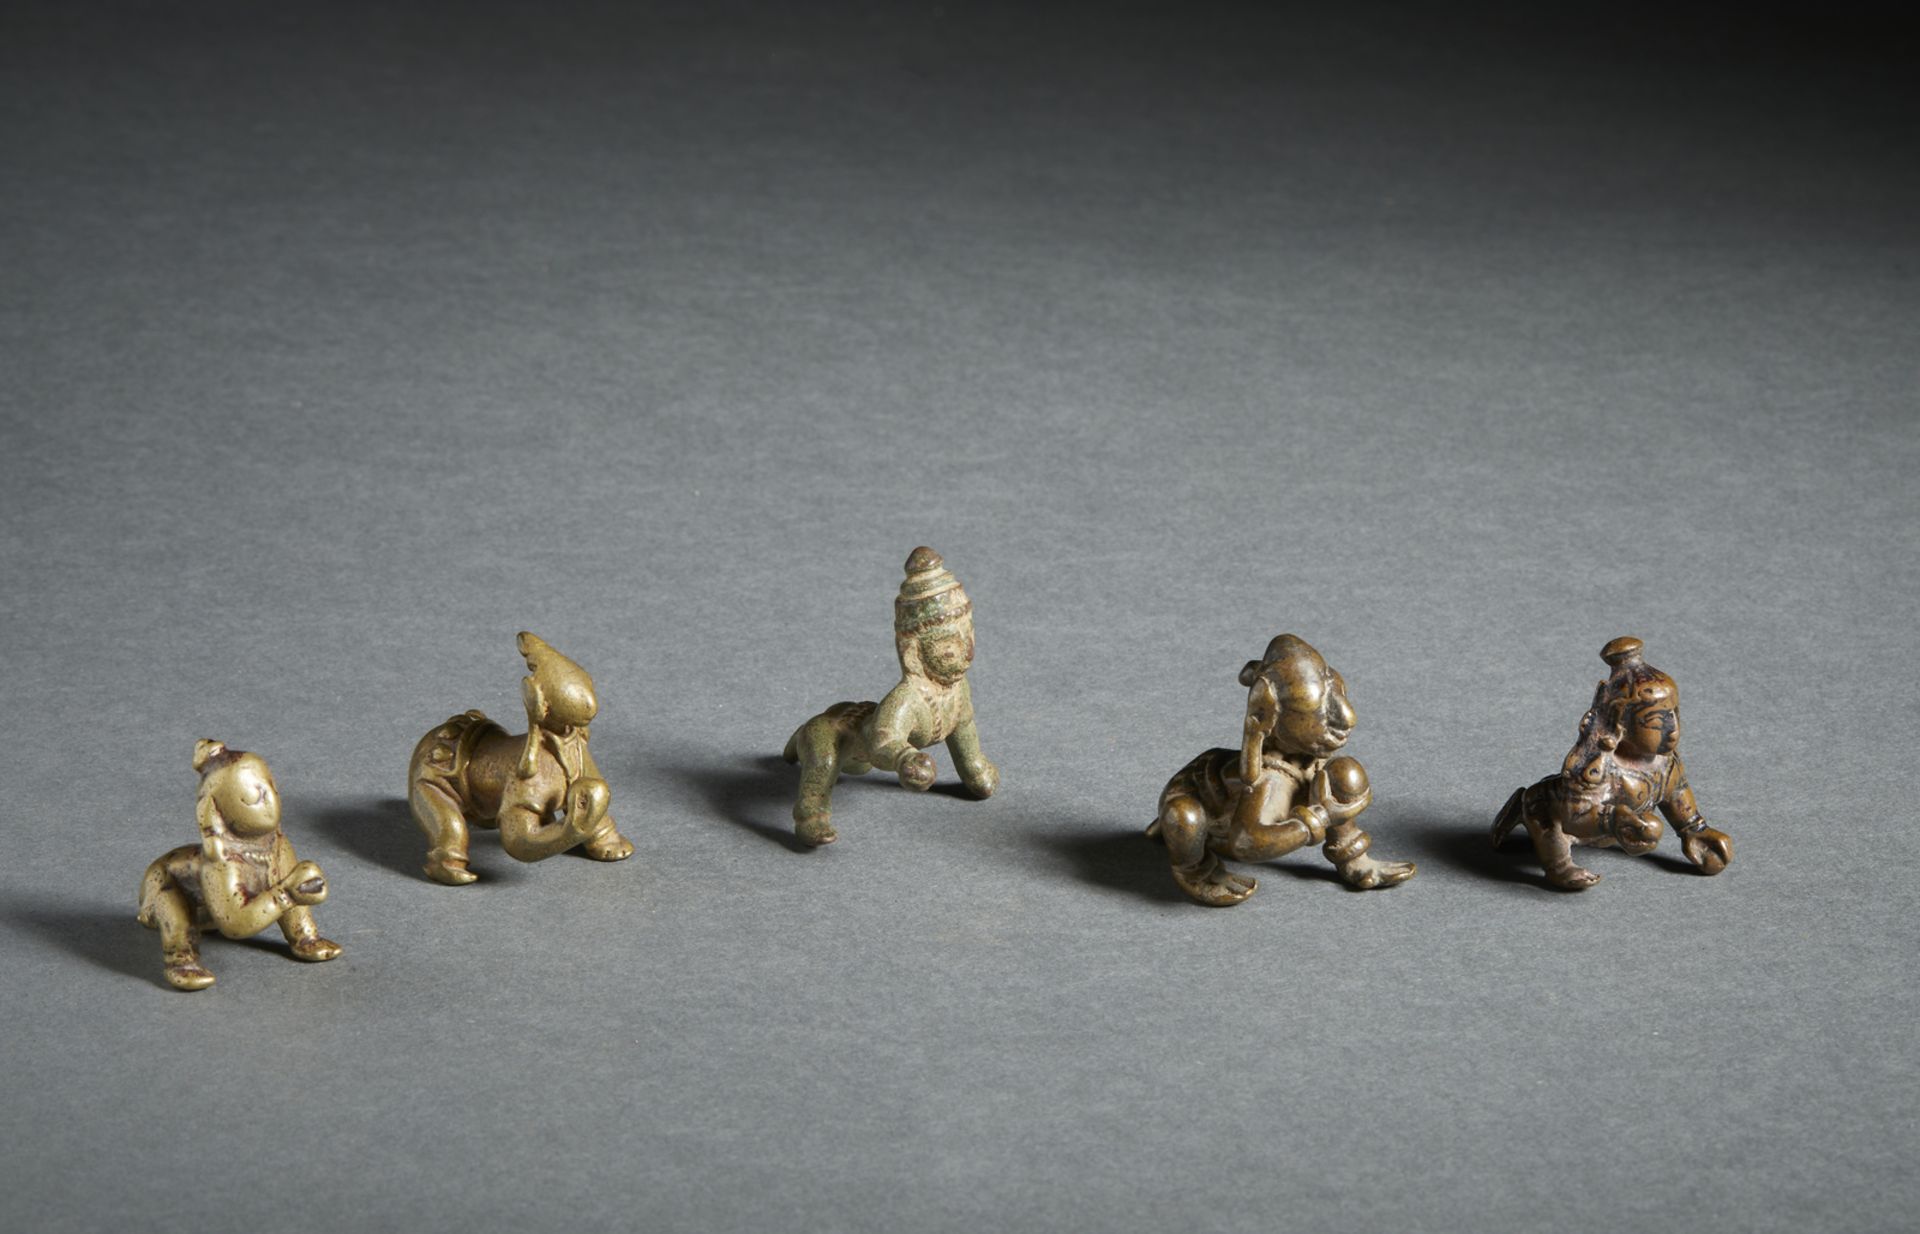 A group of five crawling copper alloy Balakrishna figures India, 18th-19th century The size shown